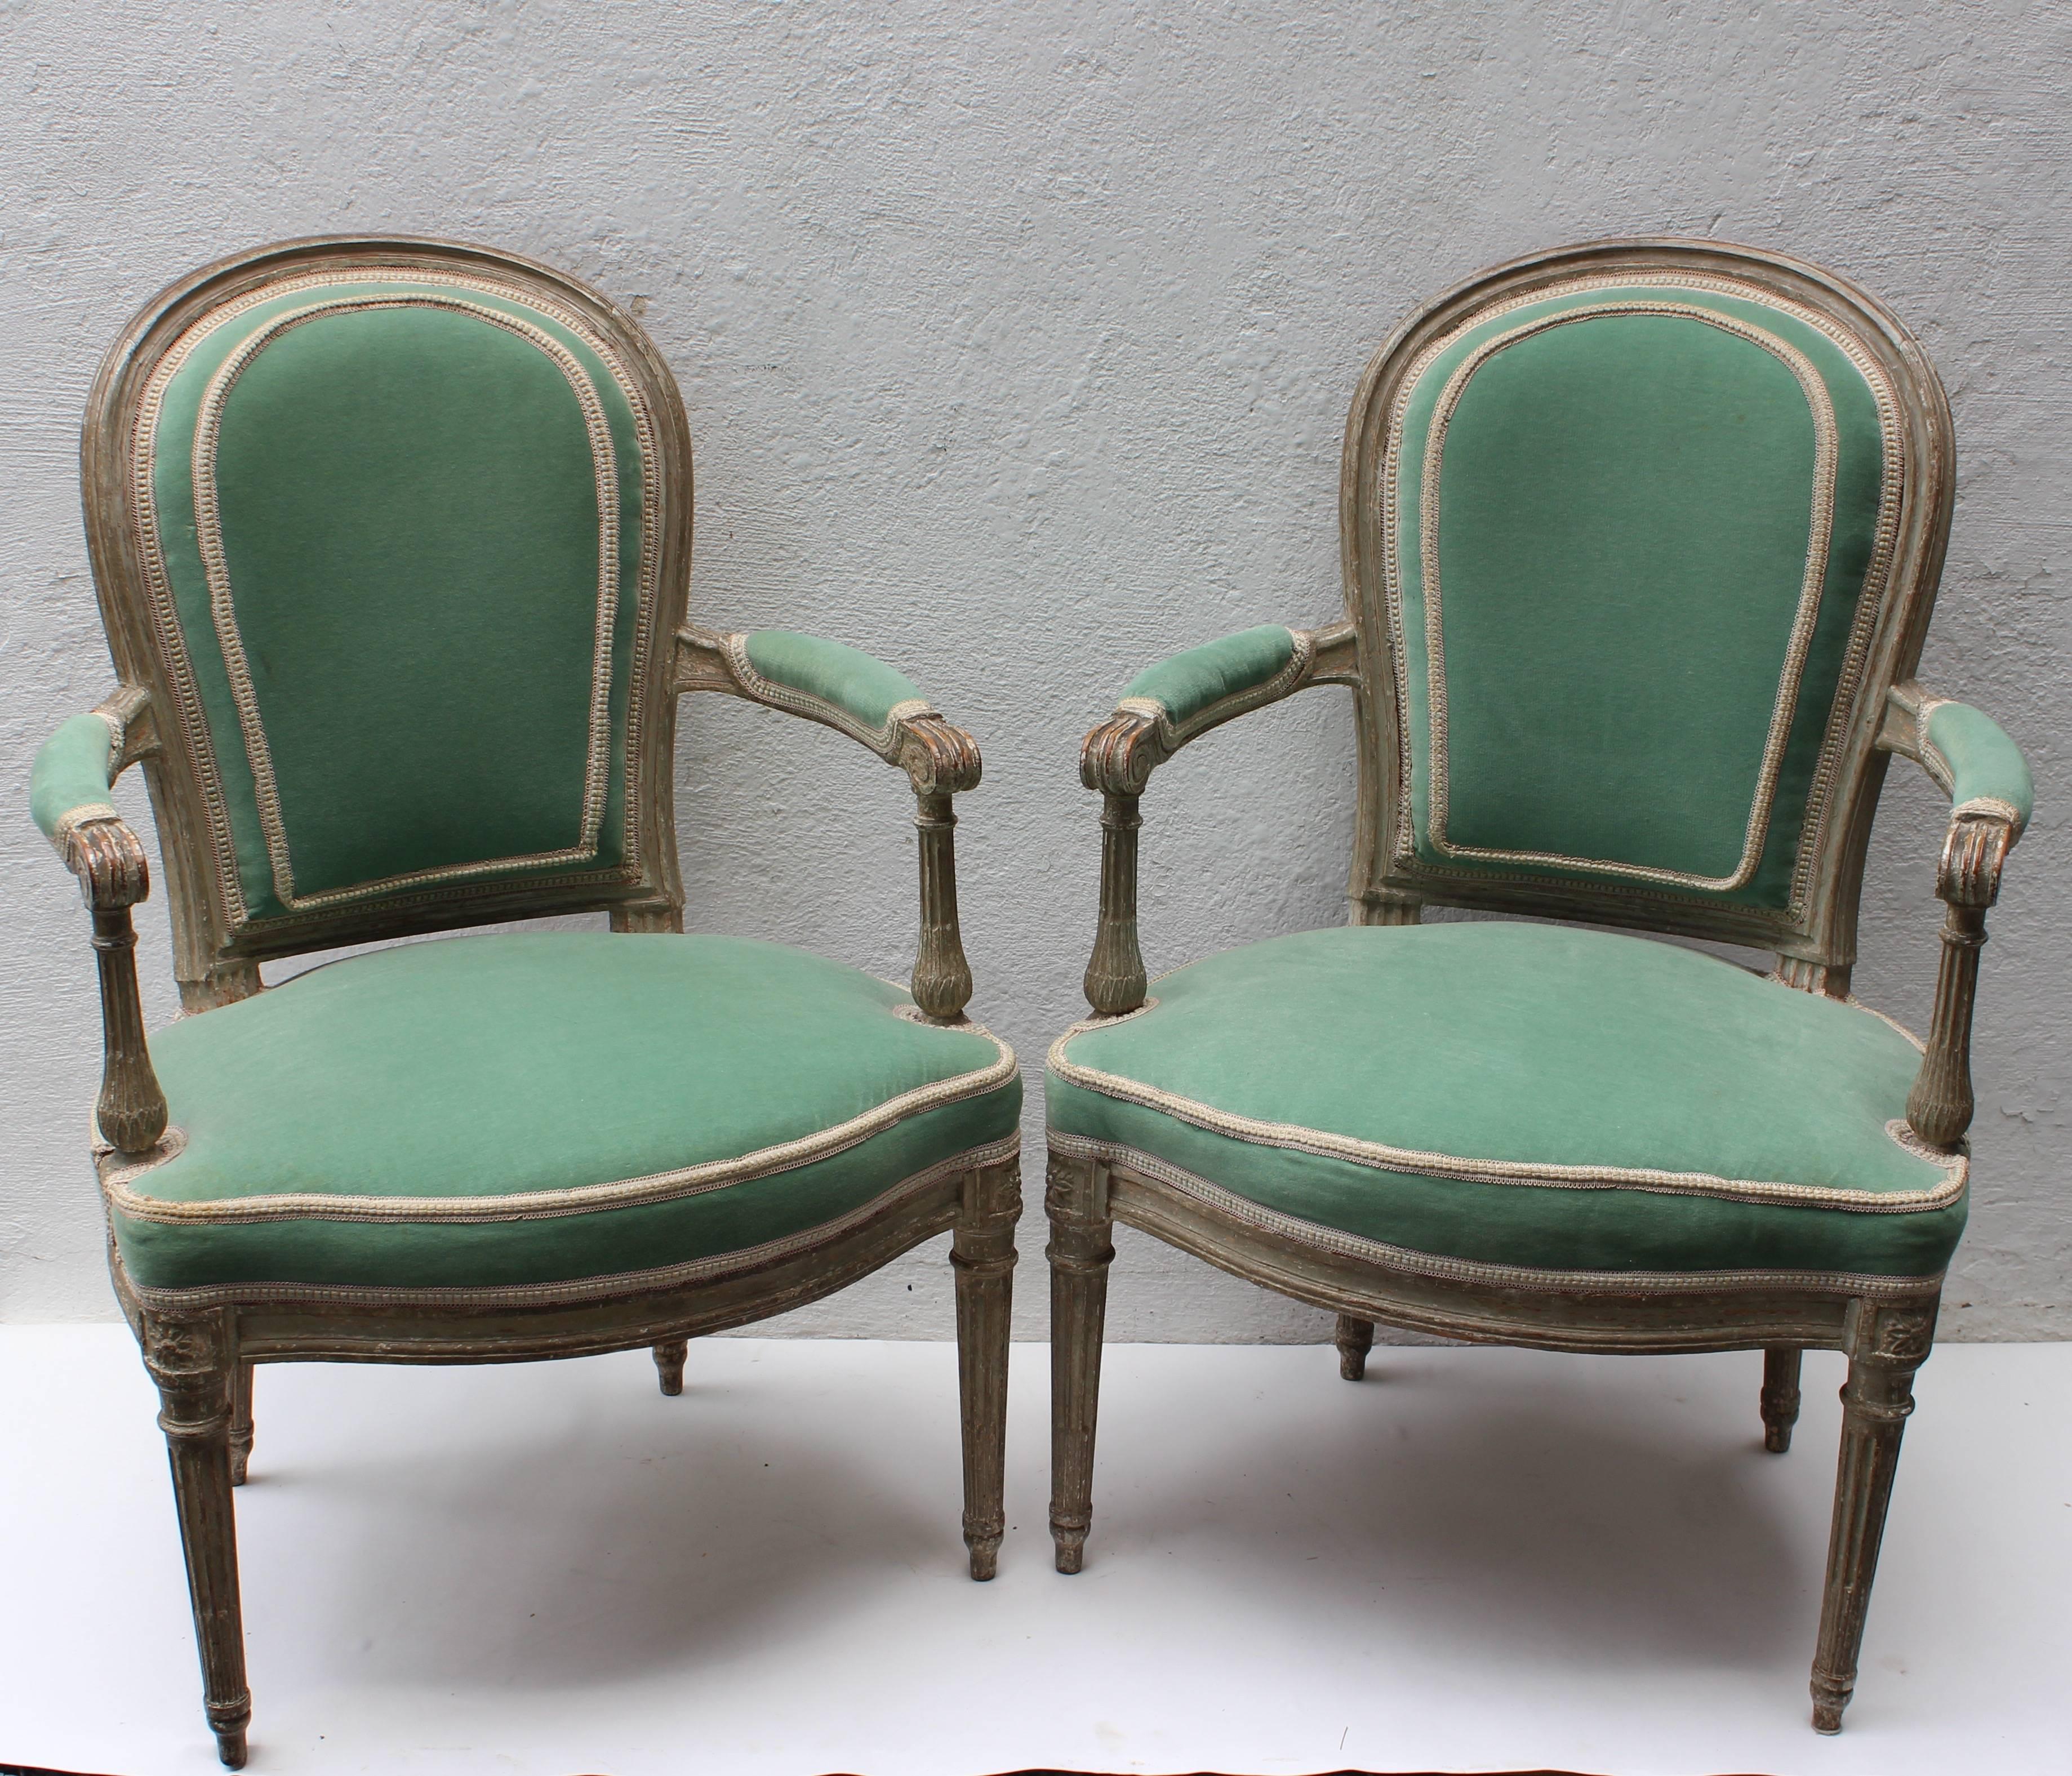 Pair of 18th Century Louis XVI Fauteuils Attributed to Georges Jacob For Sale 4